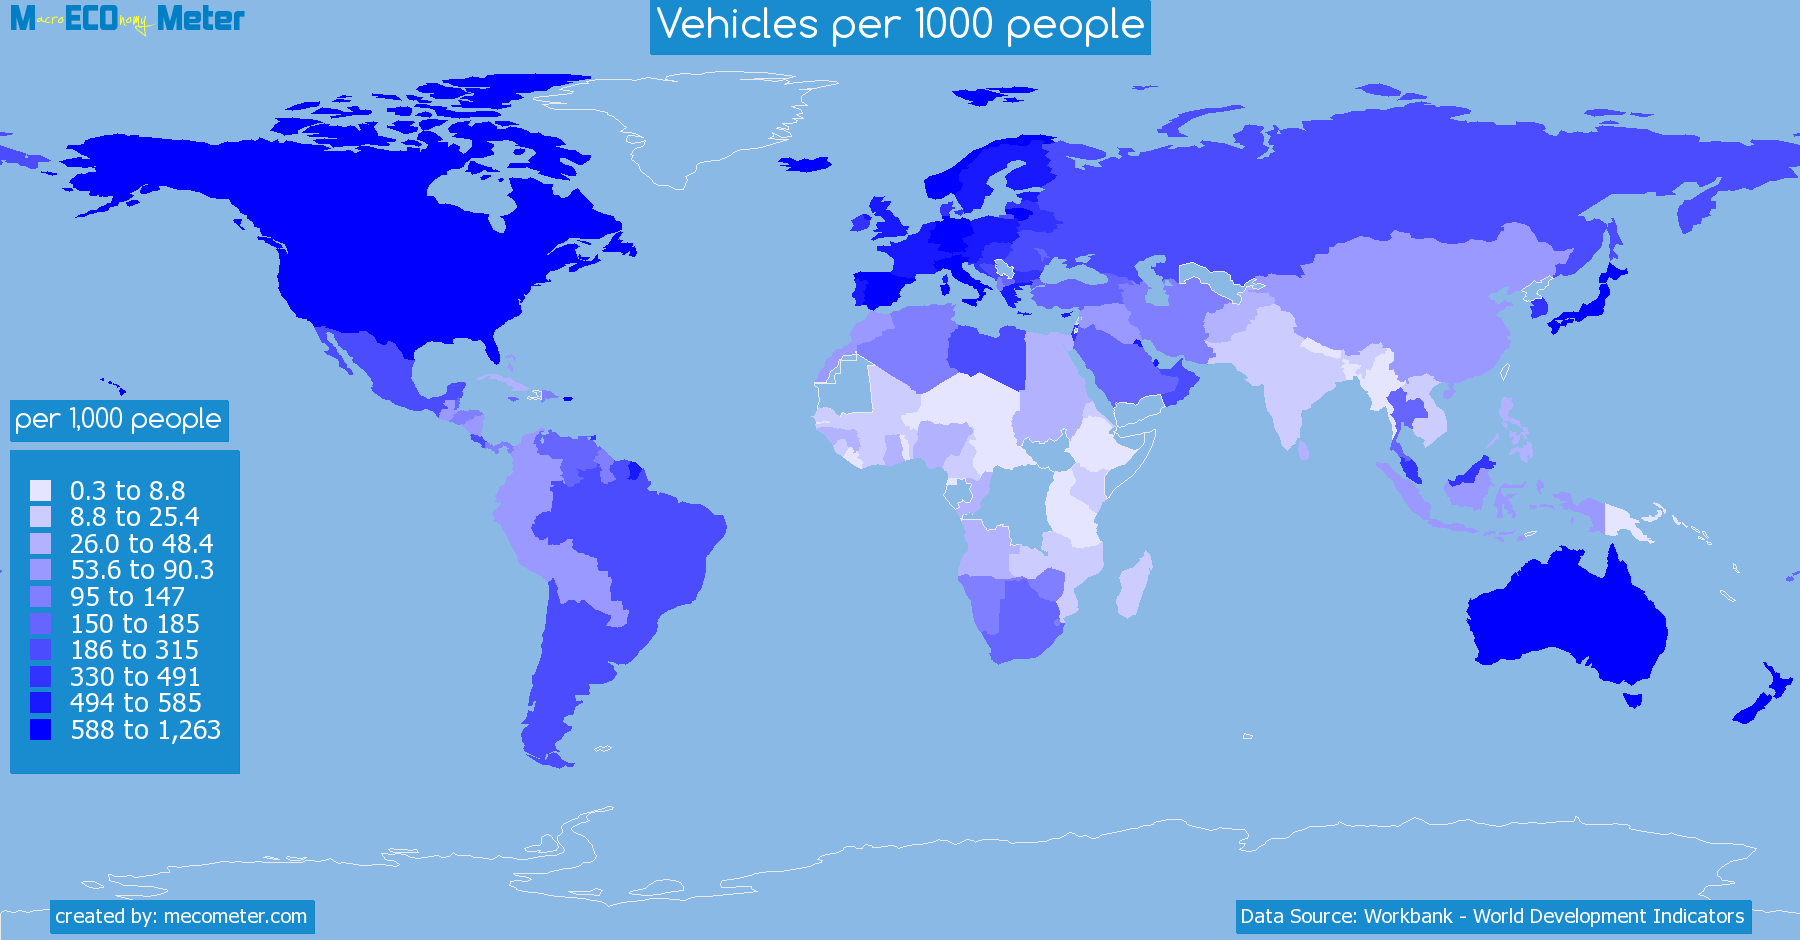 Worldmap of all countries colored to reflect the values of Vehicles per 1000 people